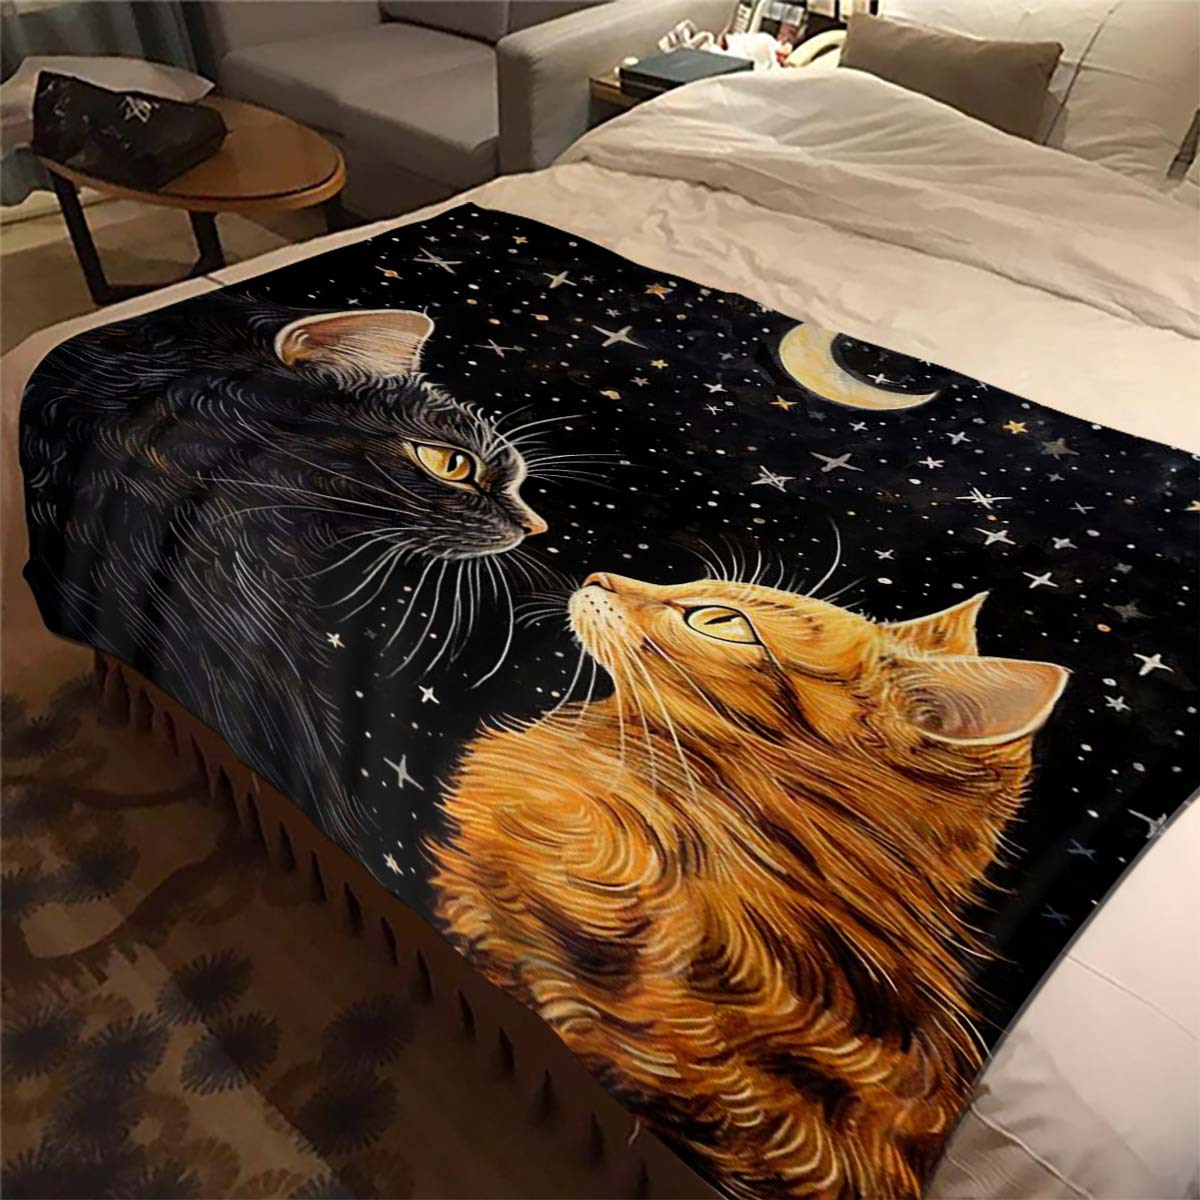 

Creative Art Patterns Of A Beautiful Starry Sky, Orange Cat, And Black Cat On A Four-season Office Chair Made Of Flannel Blanket.